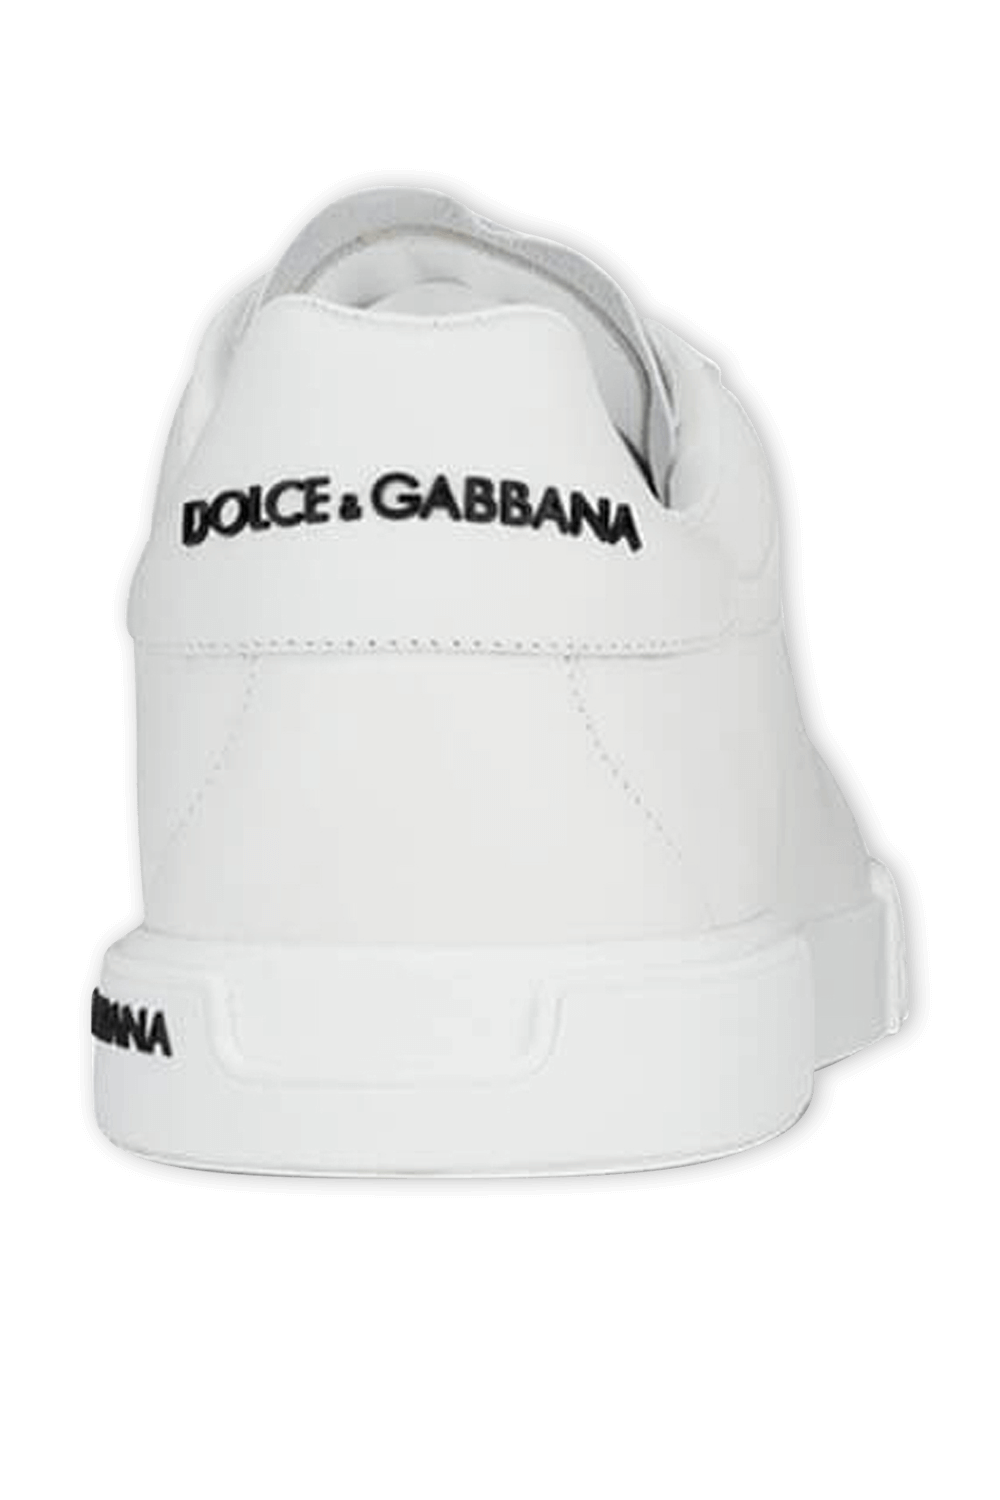 Low Top Sneakers in White DOLCE & GABBANA